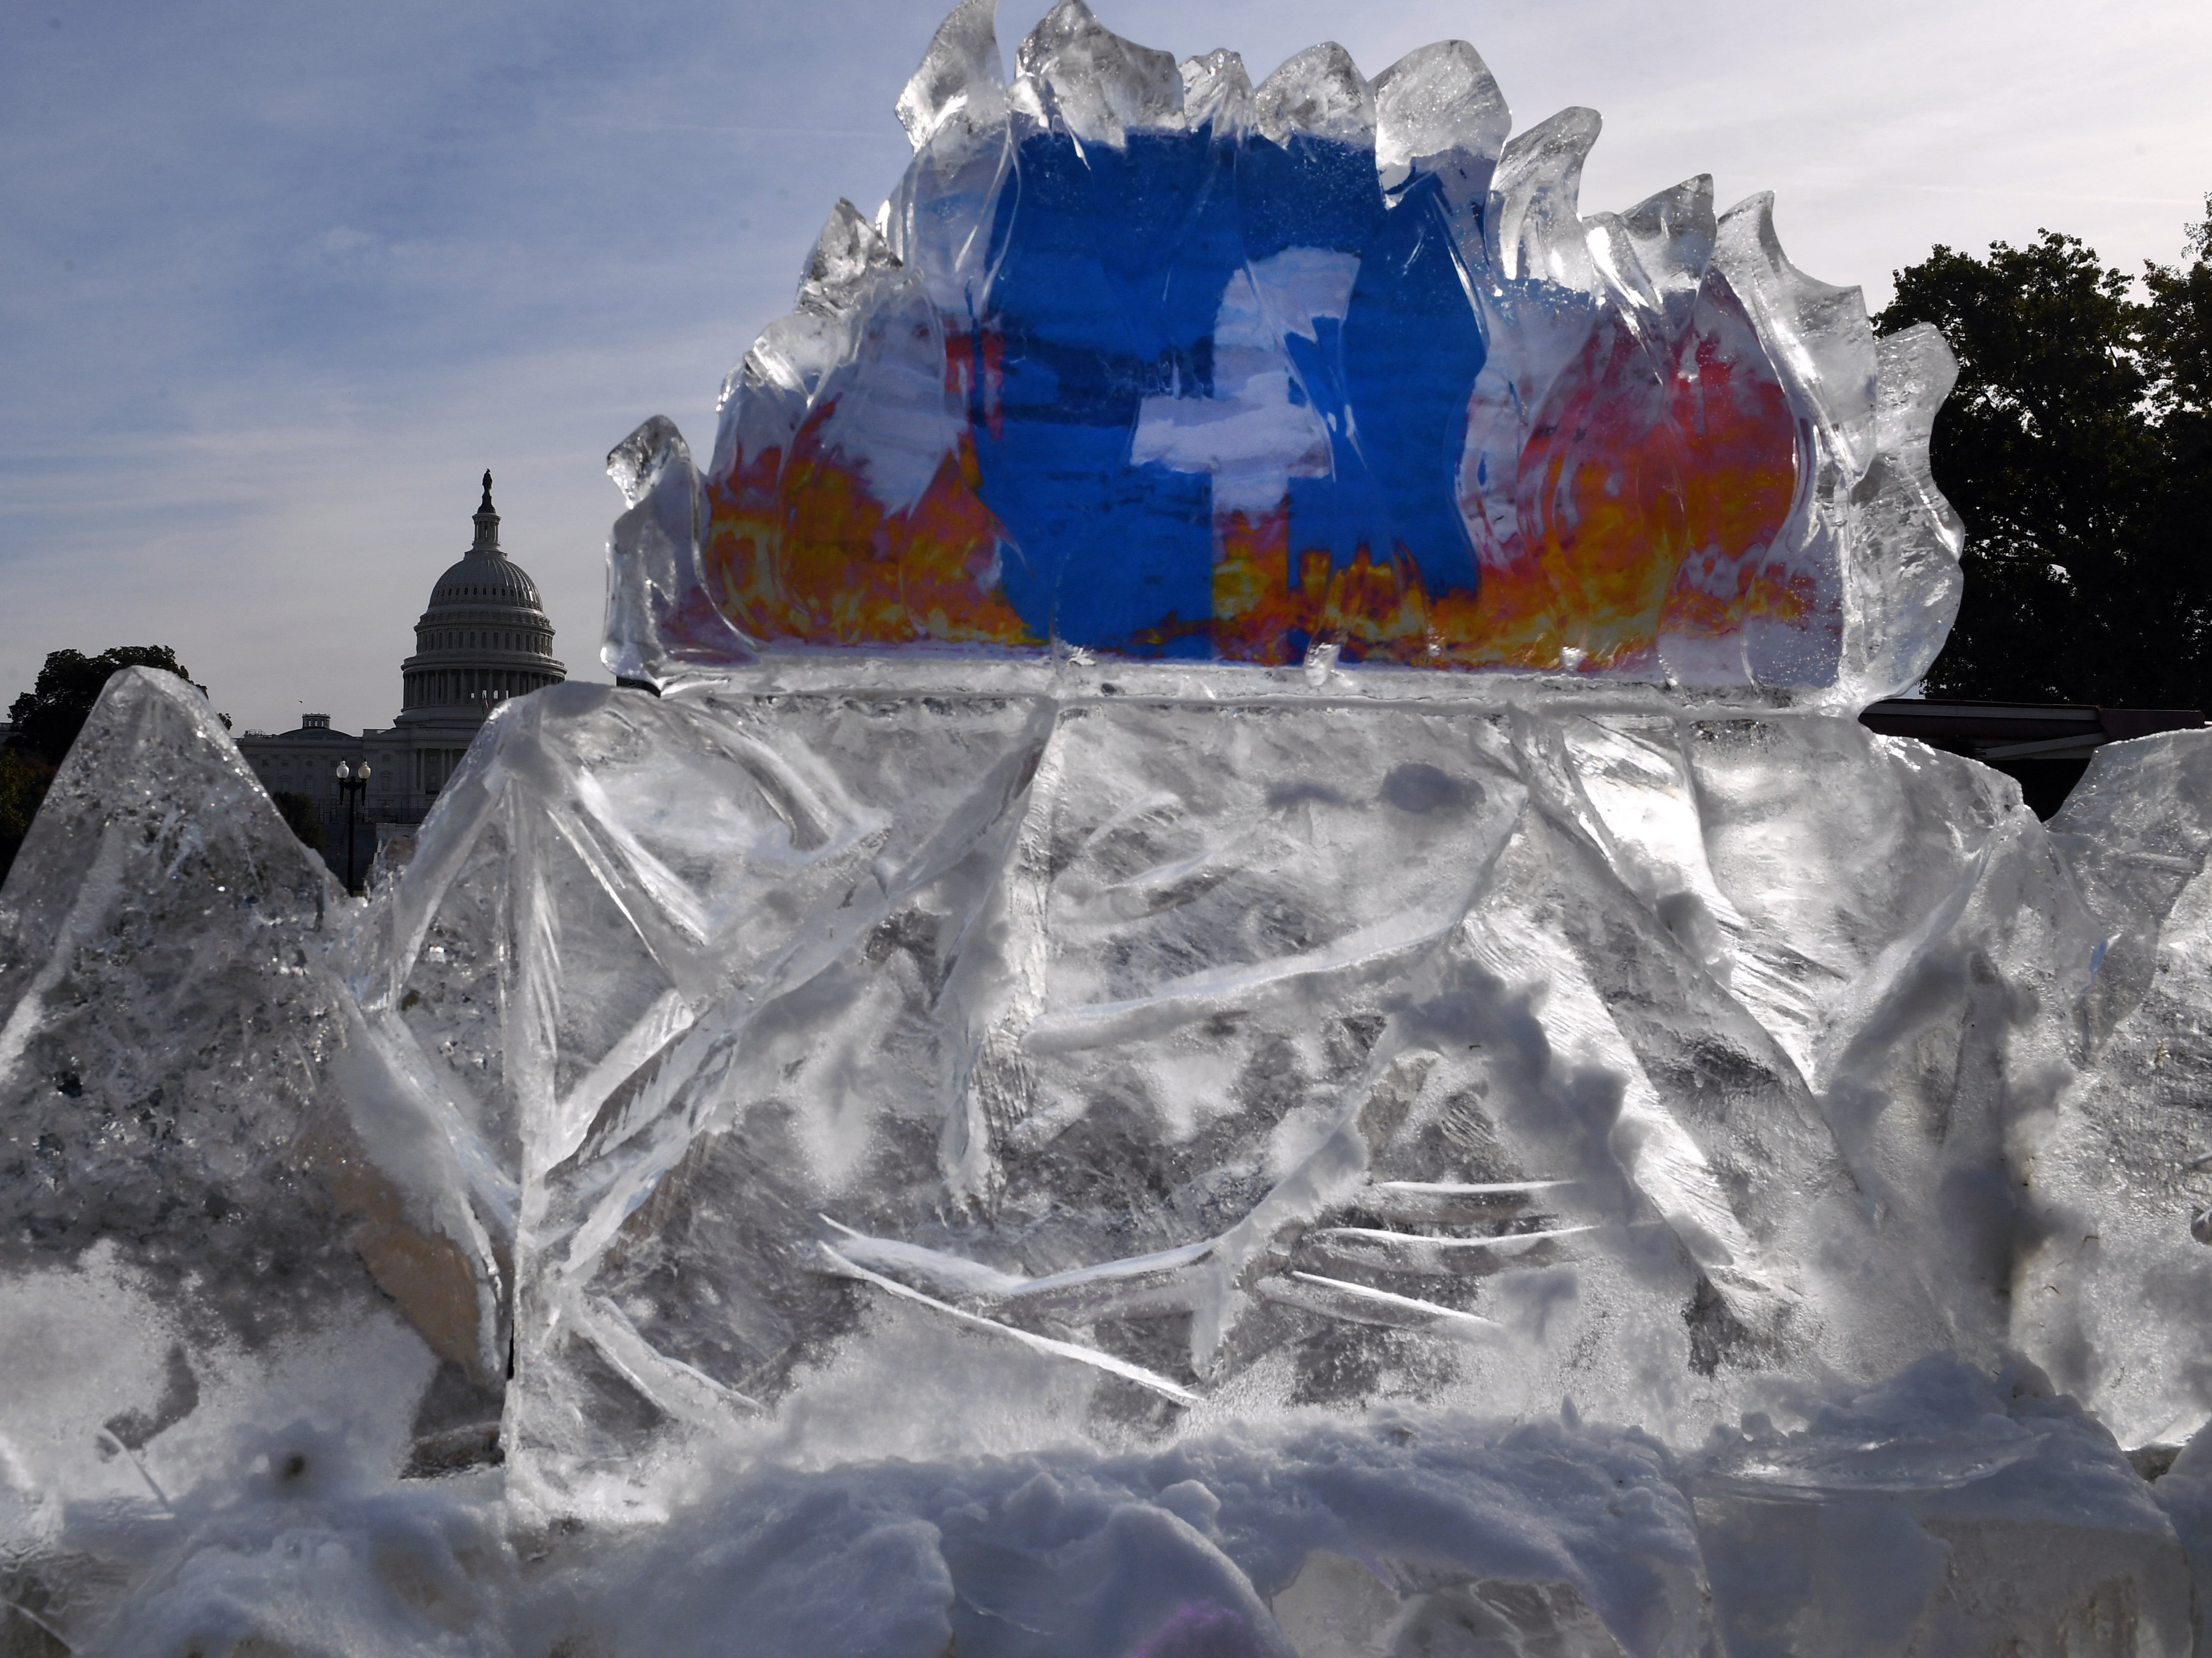 Protests left a huge block of ice in Washington DC to protest against misinformation on Facebook